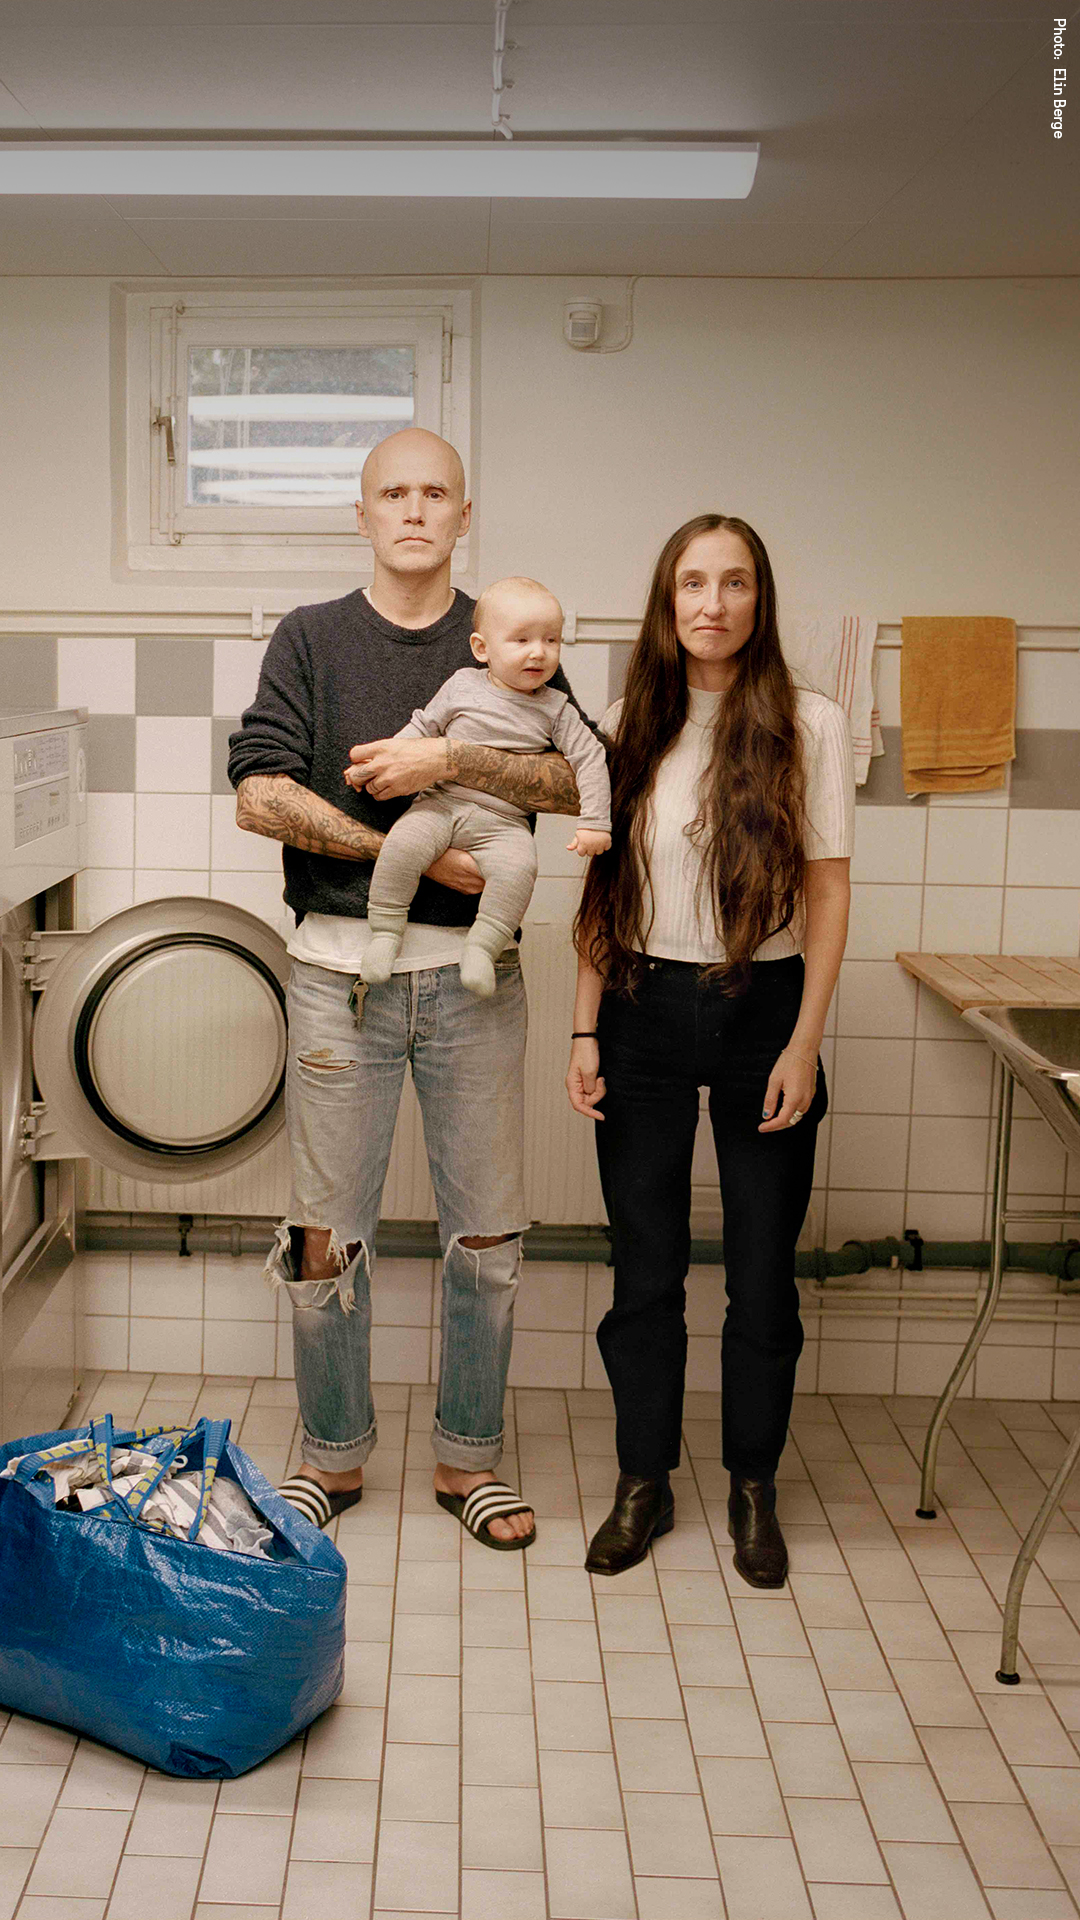 Two parents with their baby in the laundry room